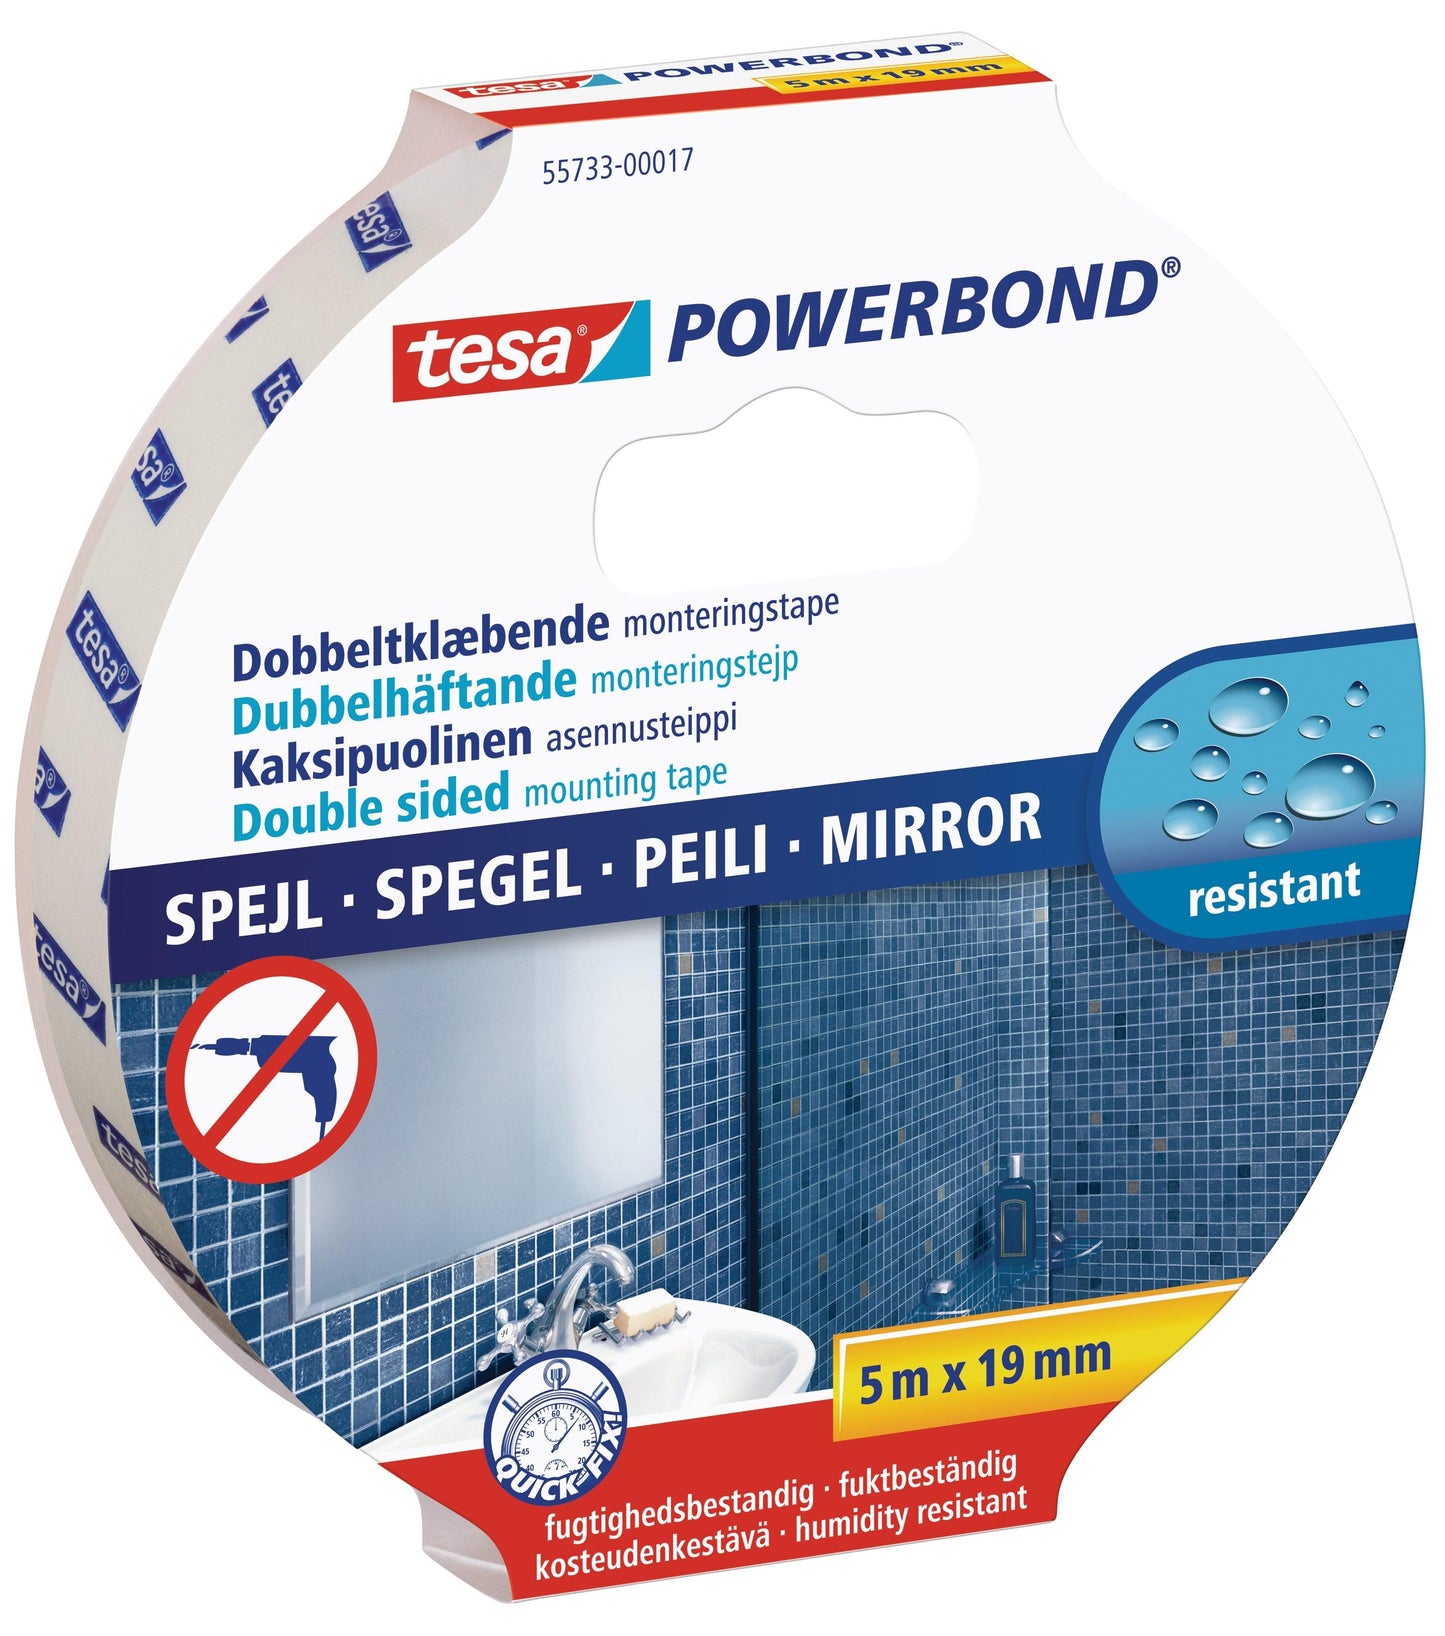 TESA Powerbond Mirror Tape 5m x 19mm - Humidity Resistant - Premium Tape from TESA - Just R 168! Shop now at Securadeal